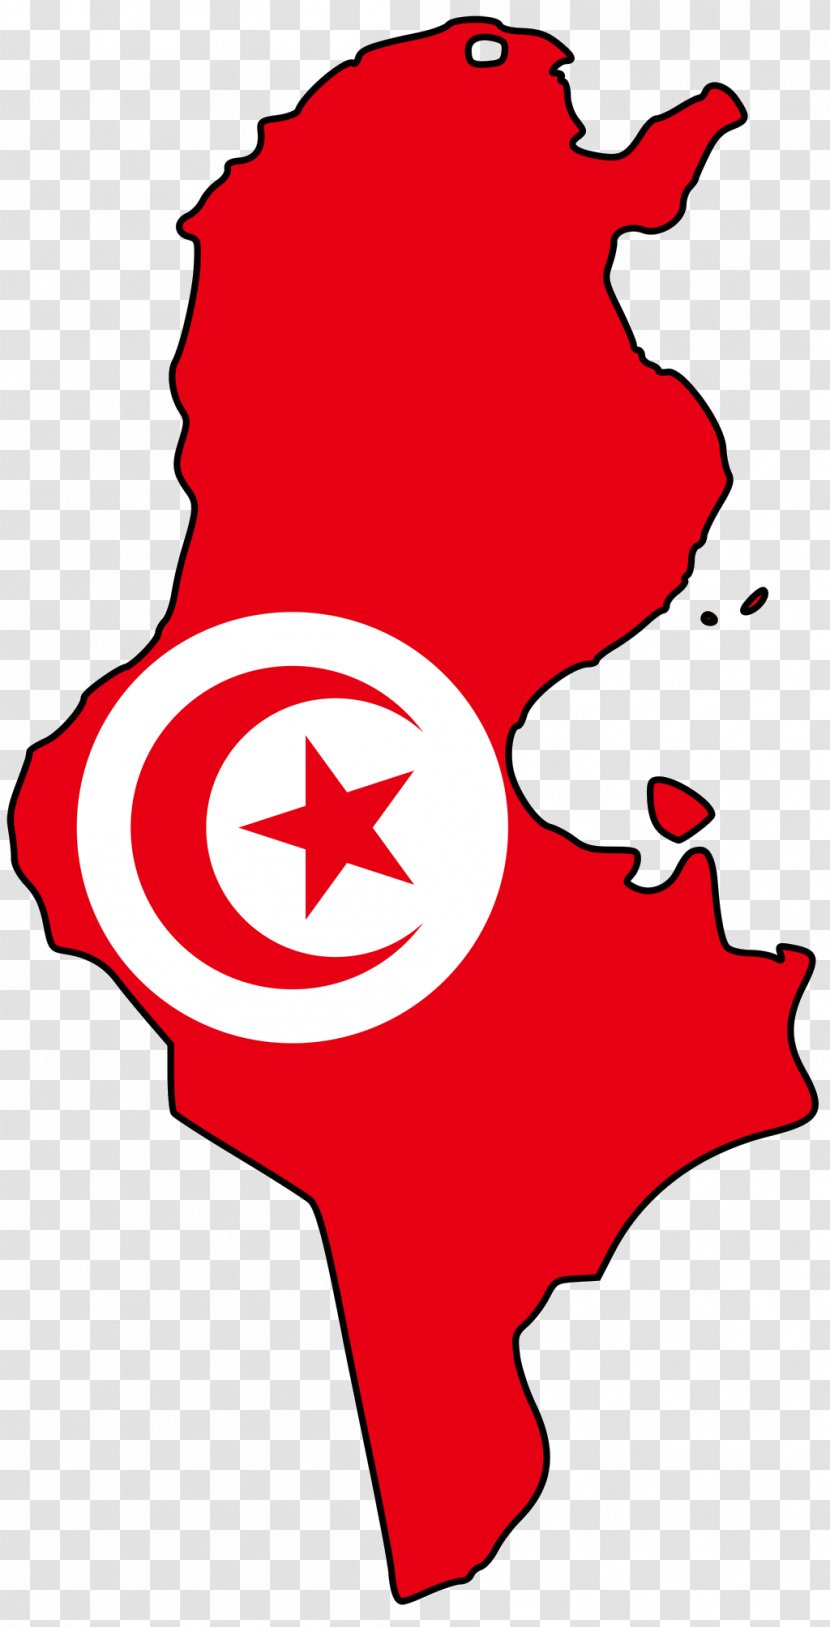 Flag Of Tunisia Tunisian Campaign Map - Topographic - Physical Transparent PNG